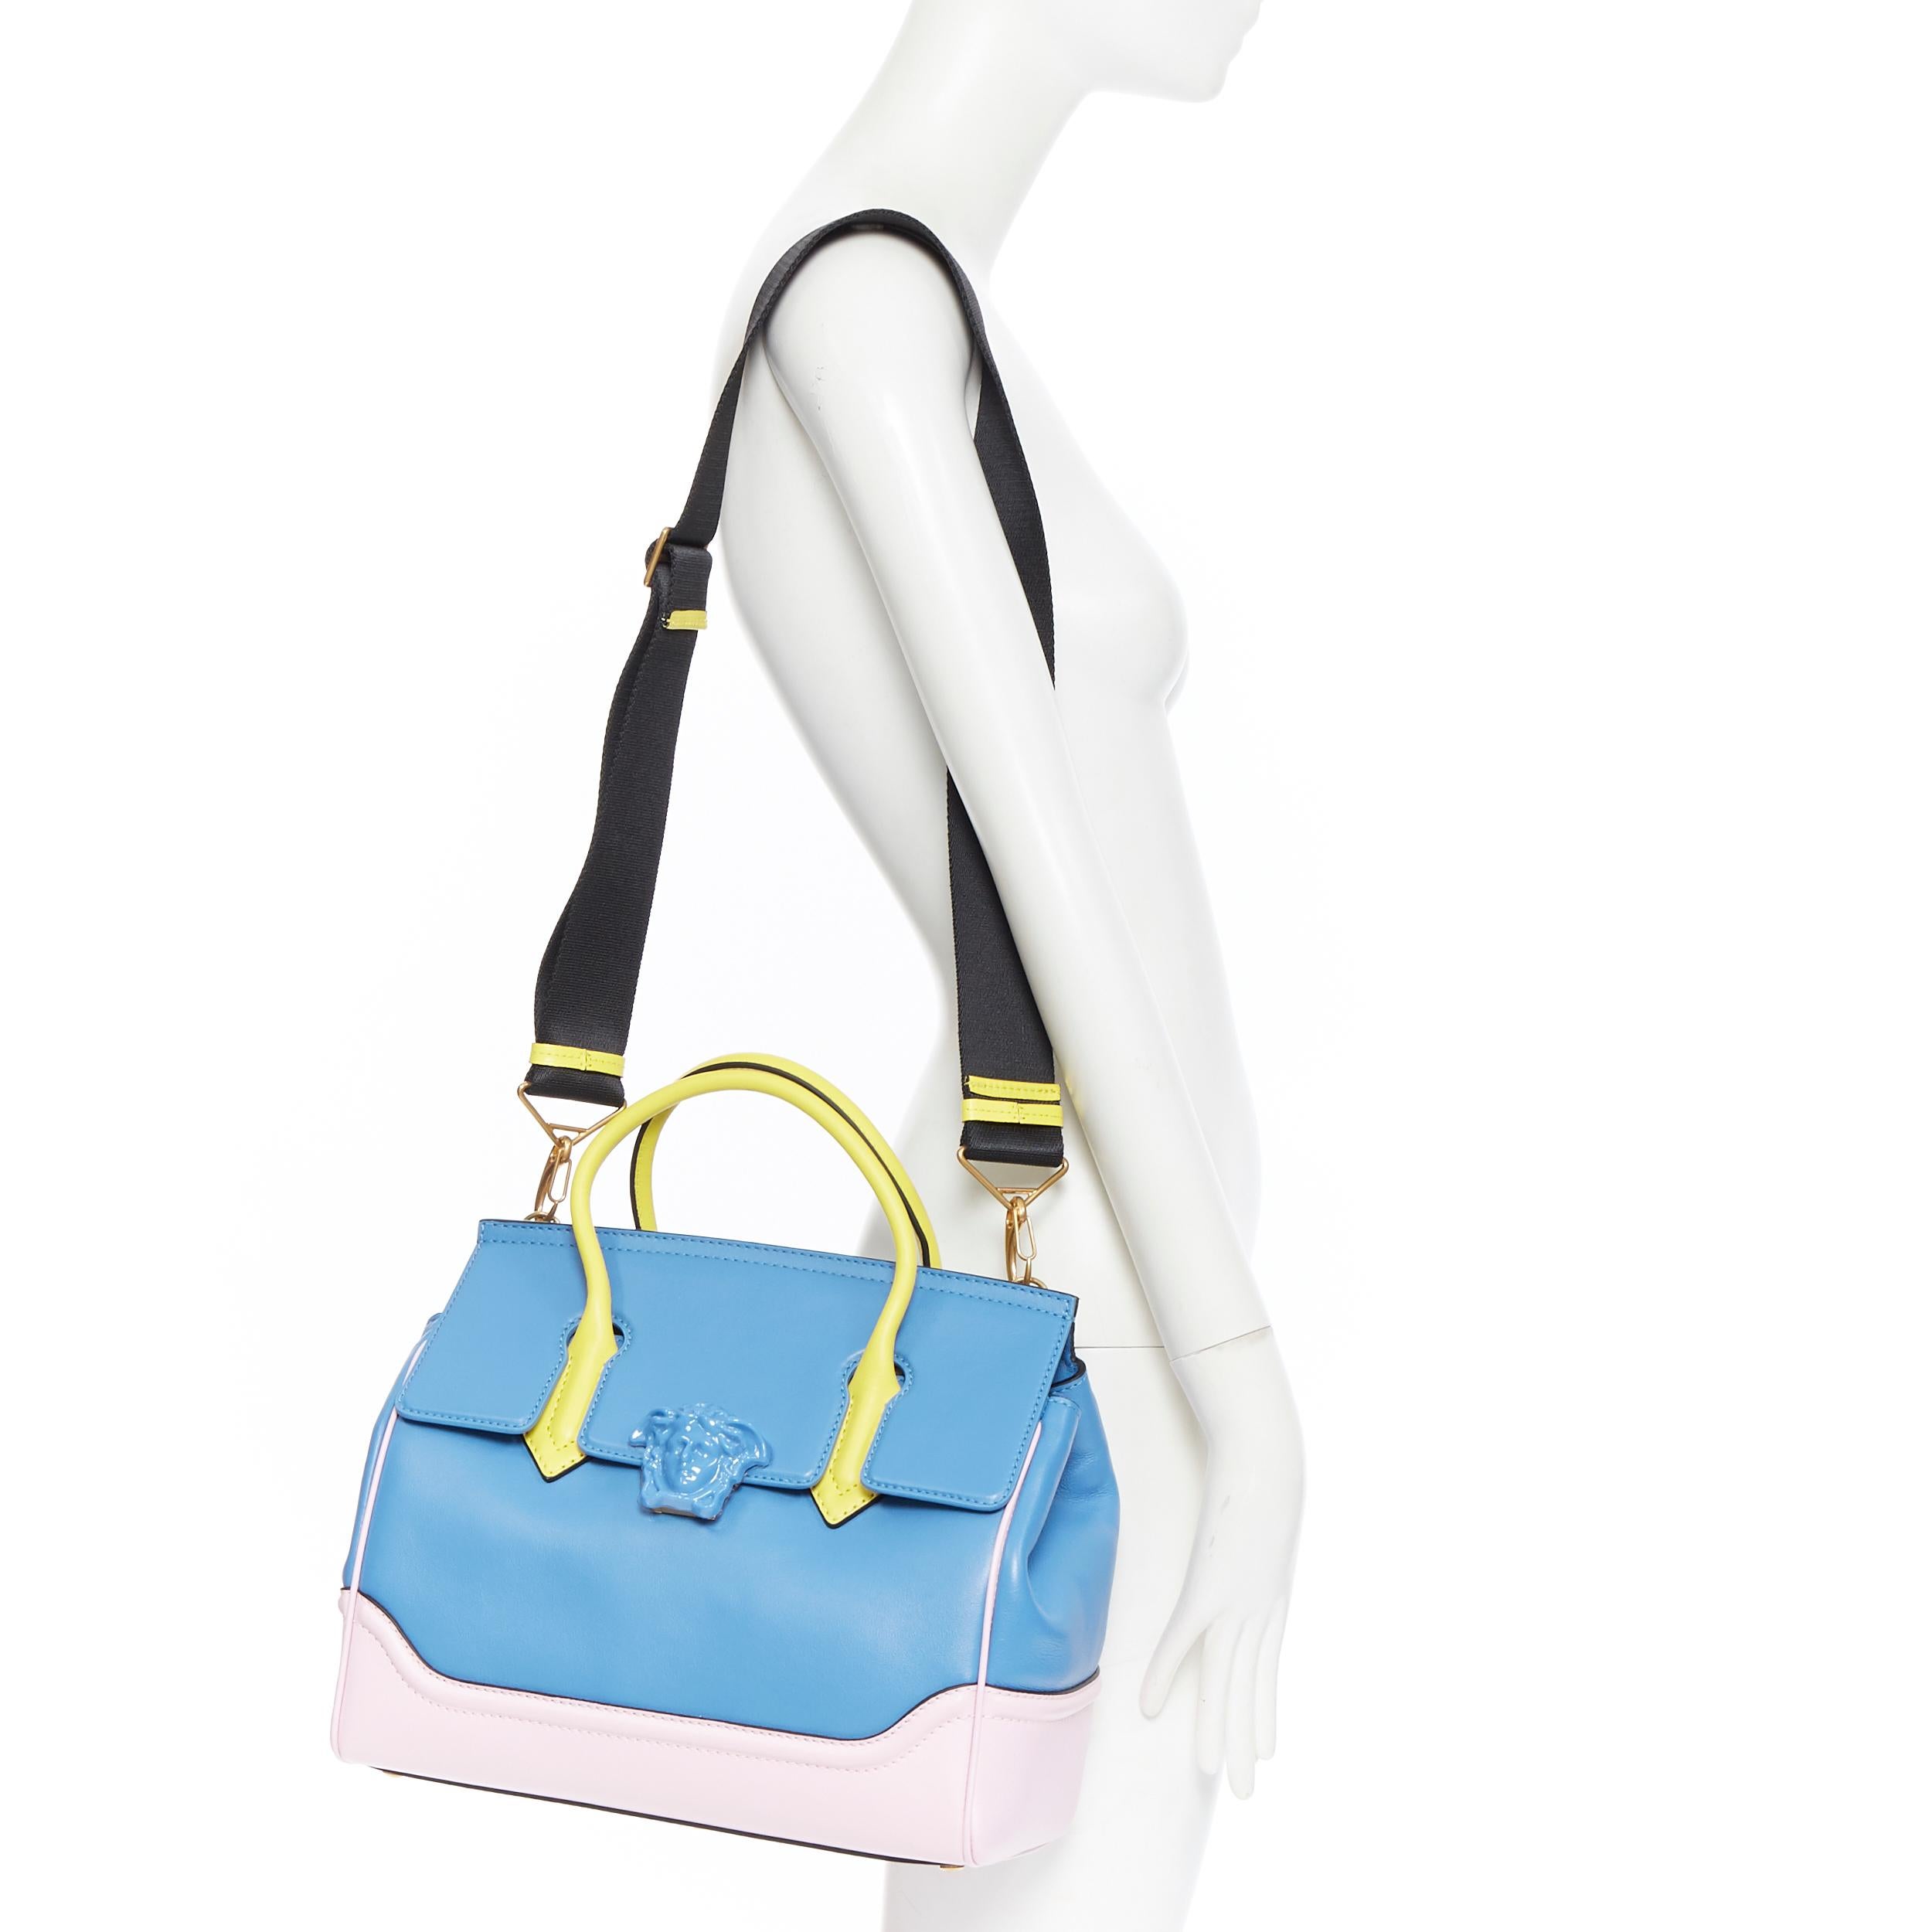 new VERSACE Palazzo Empire Medium pastel blue pink colorblocked Medusa bag rare
Brand: Versace
Designer: Donatella Versace
Collection: Spring Summer 2018
Model Name / Style: Versace Empire
Material: Leather
Color: Blue, pink
Pattern: Solid
Closure: